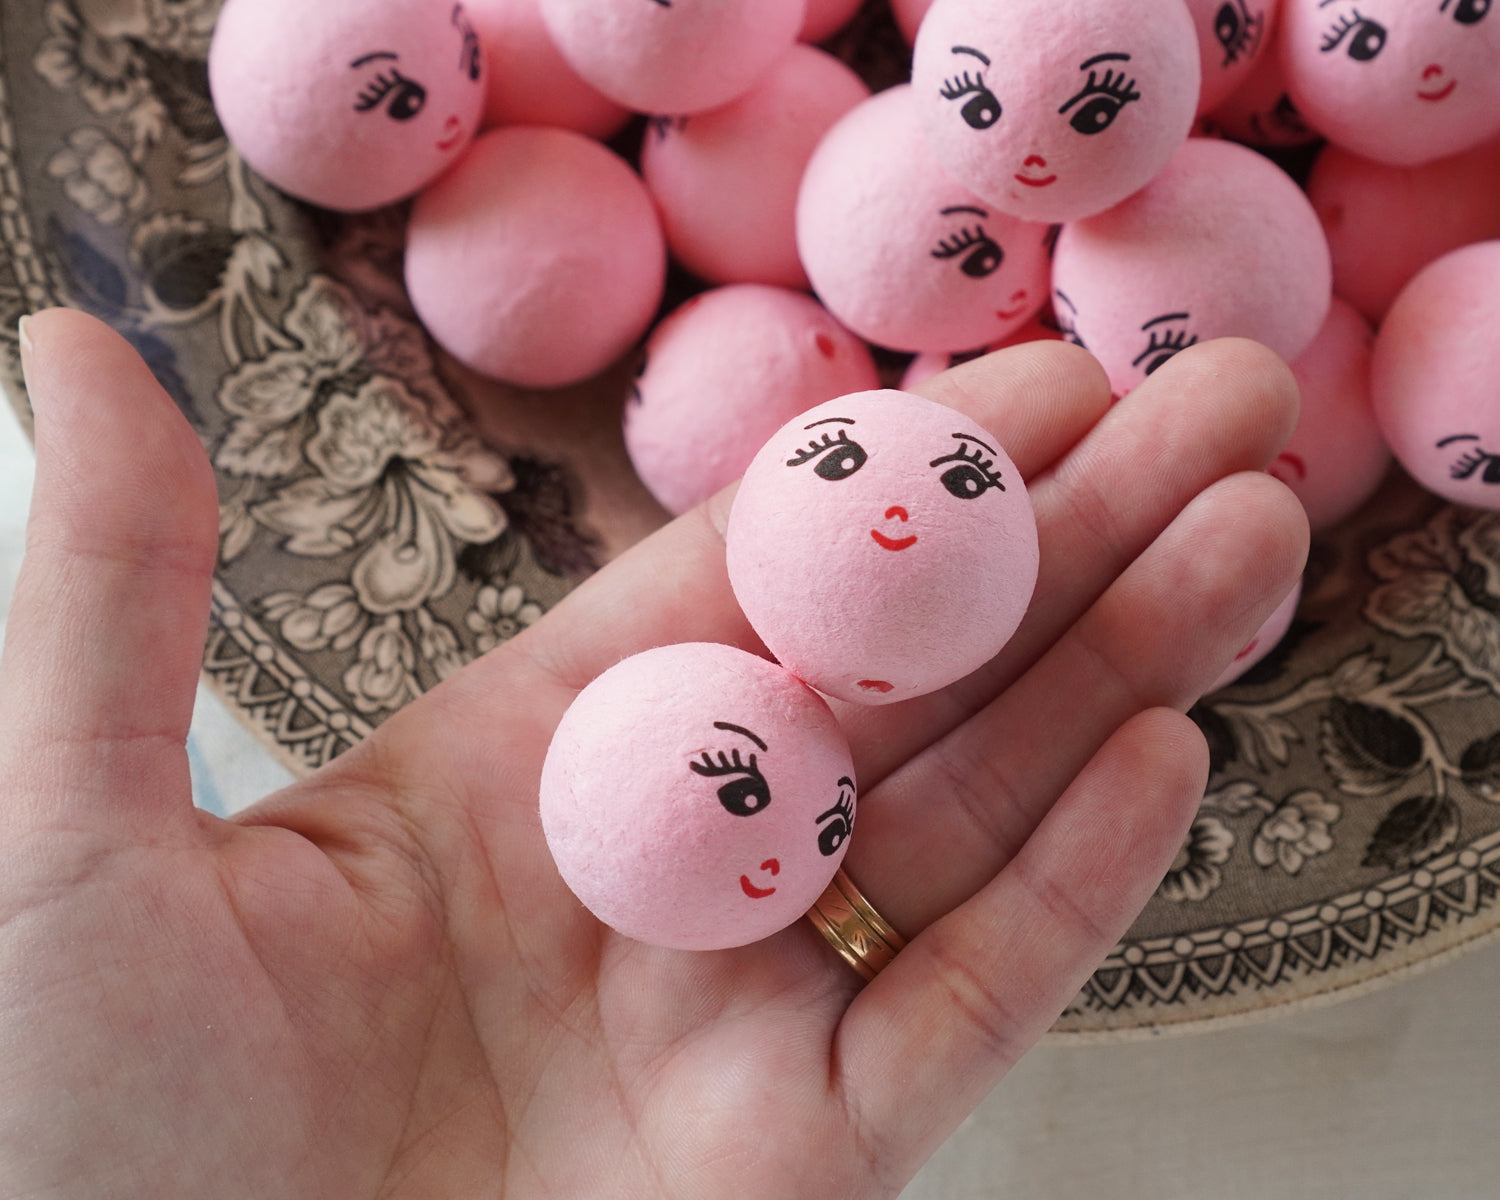 Pink Spun Cotton Heads: CHARM - Vintage-Style Cotton Doll Heads with Faces, 30mm